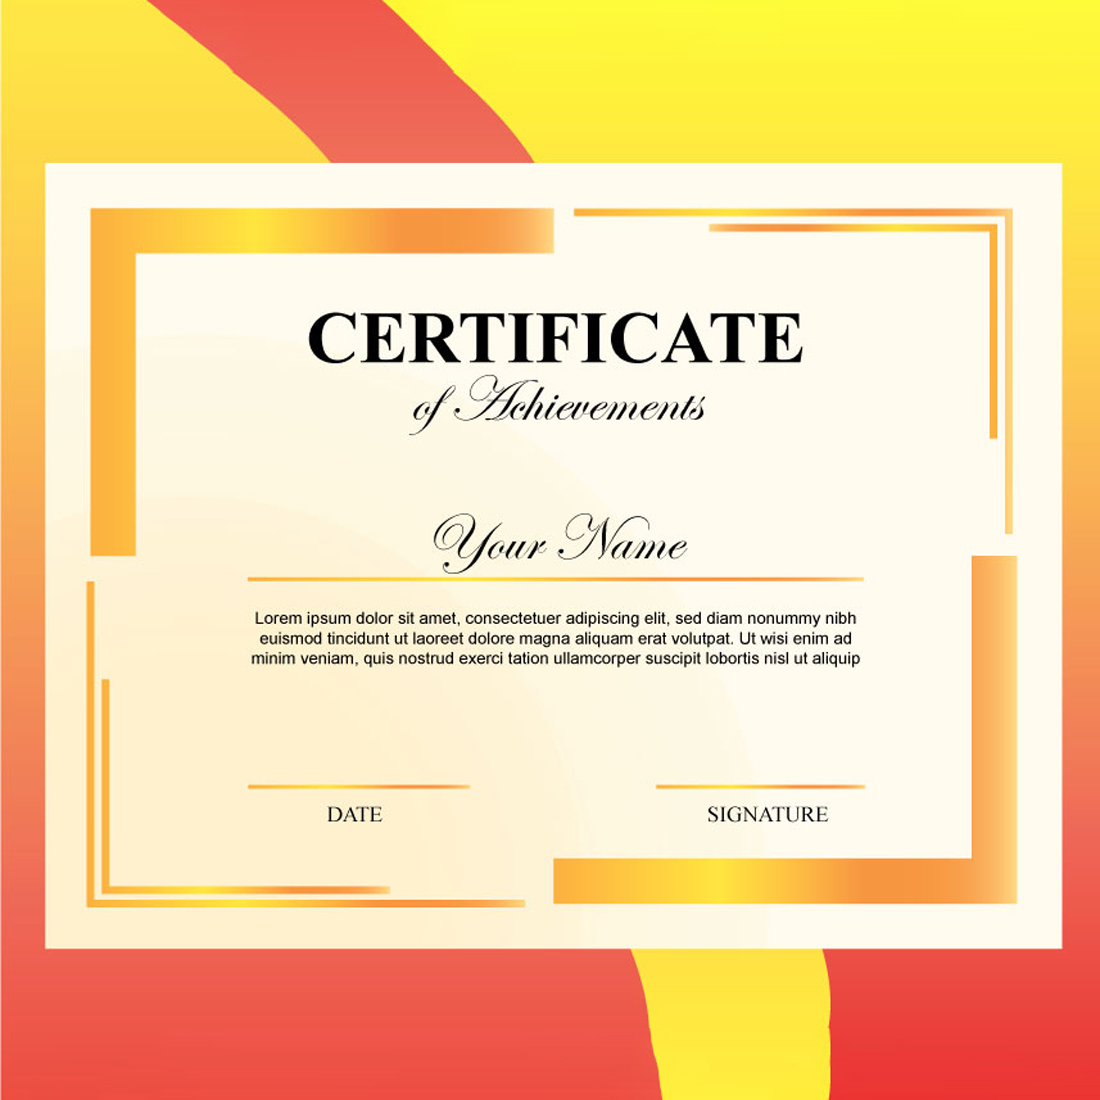 School Certificate preview image.